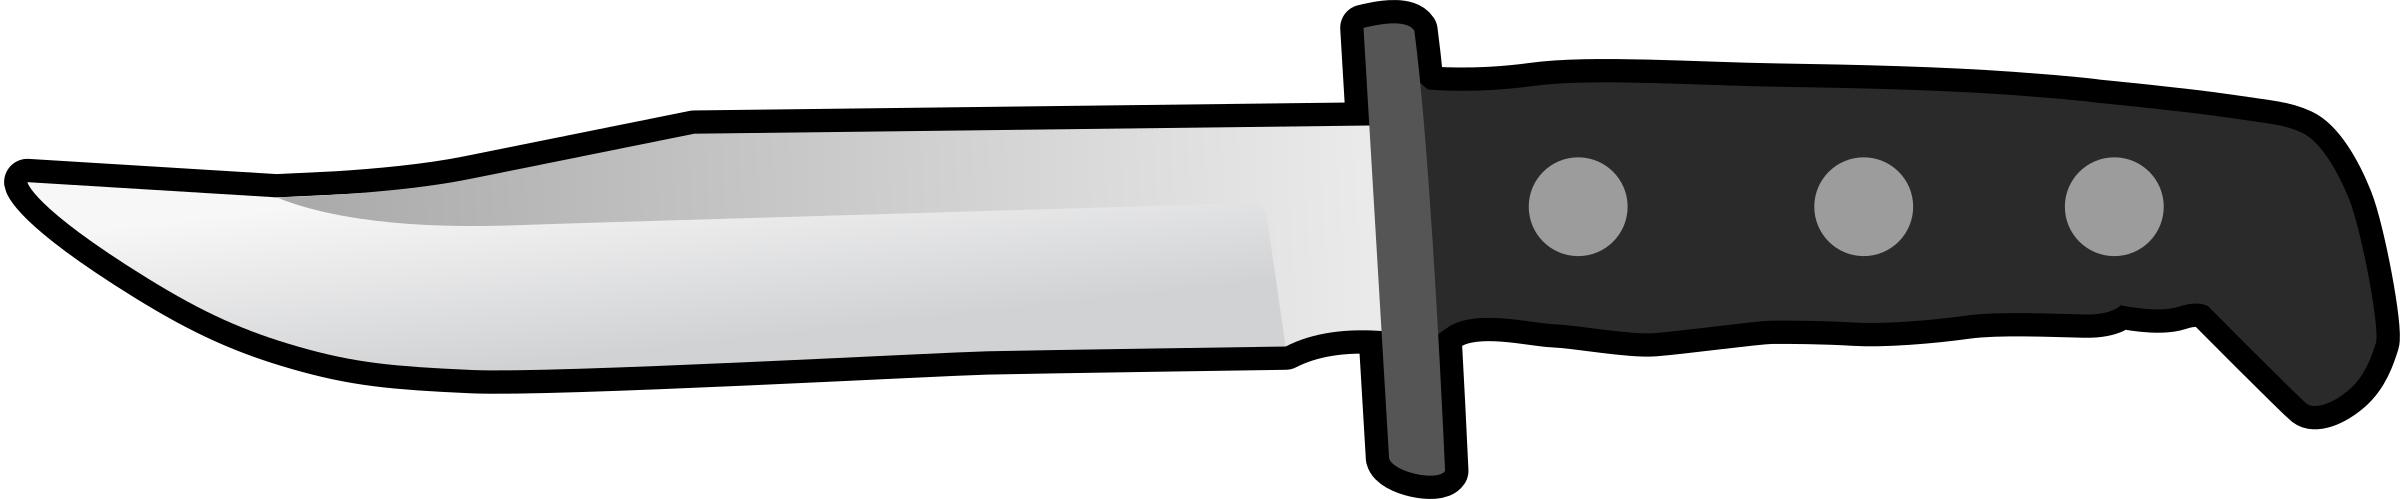 Simple Flat Knife Side View PNG icons